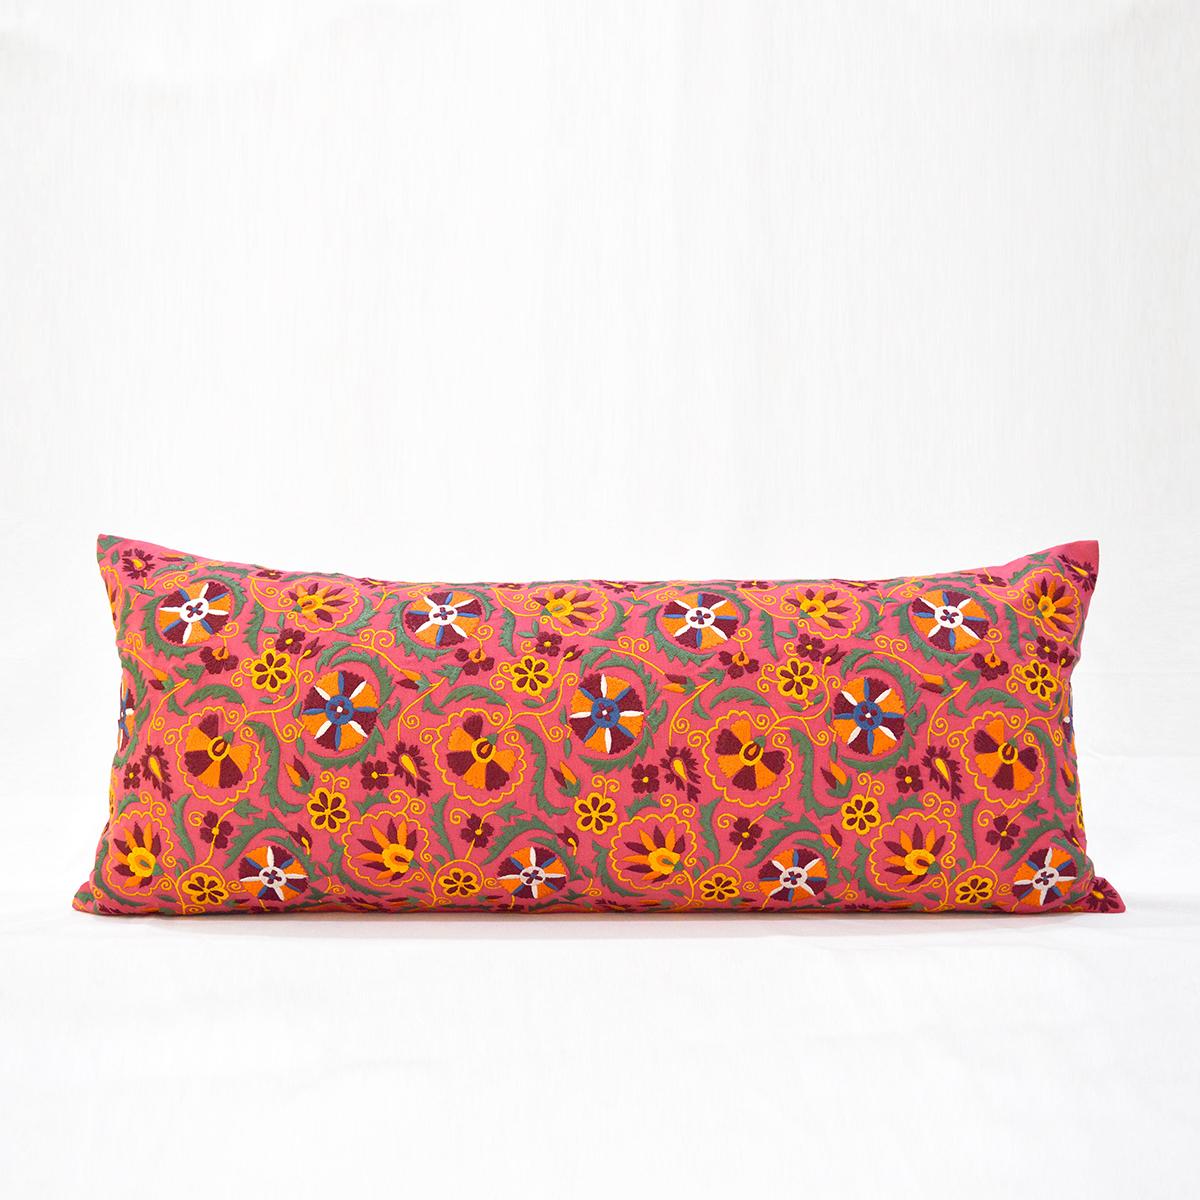 KASHIDAKAARI - Coral Red long lumbar cotton pillow cover with multicolour Suzani inspired embroidery, sizes available